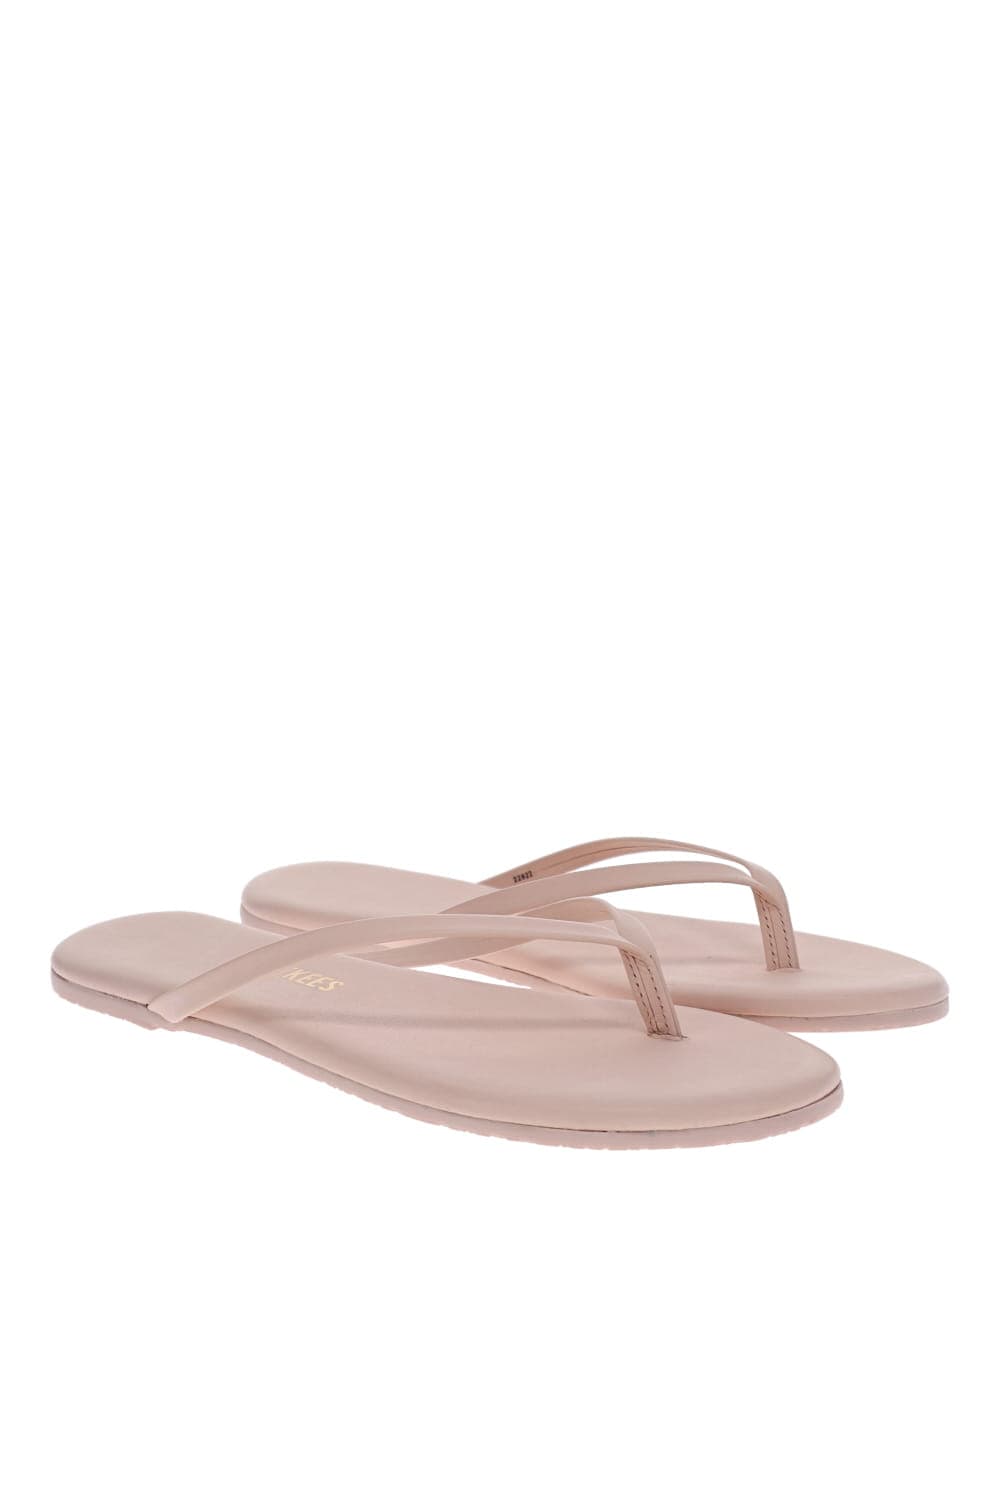 TKEES Solids Soft Pink Leather Sandal